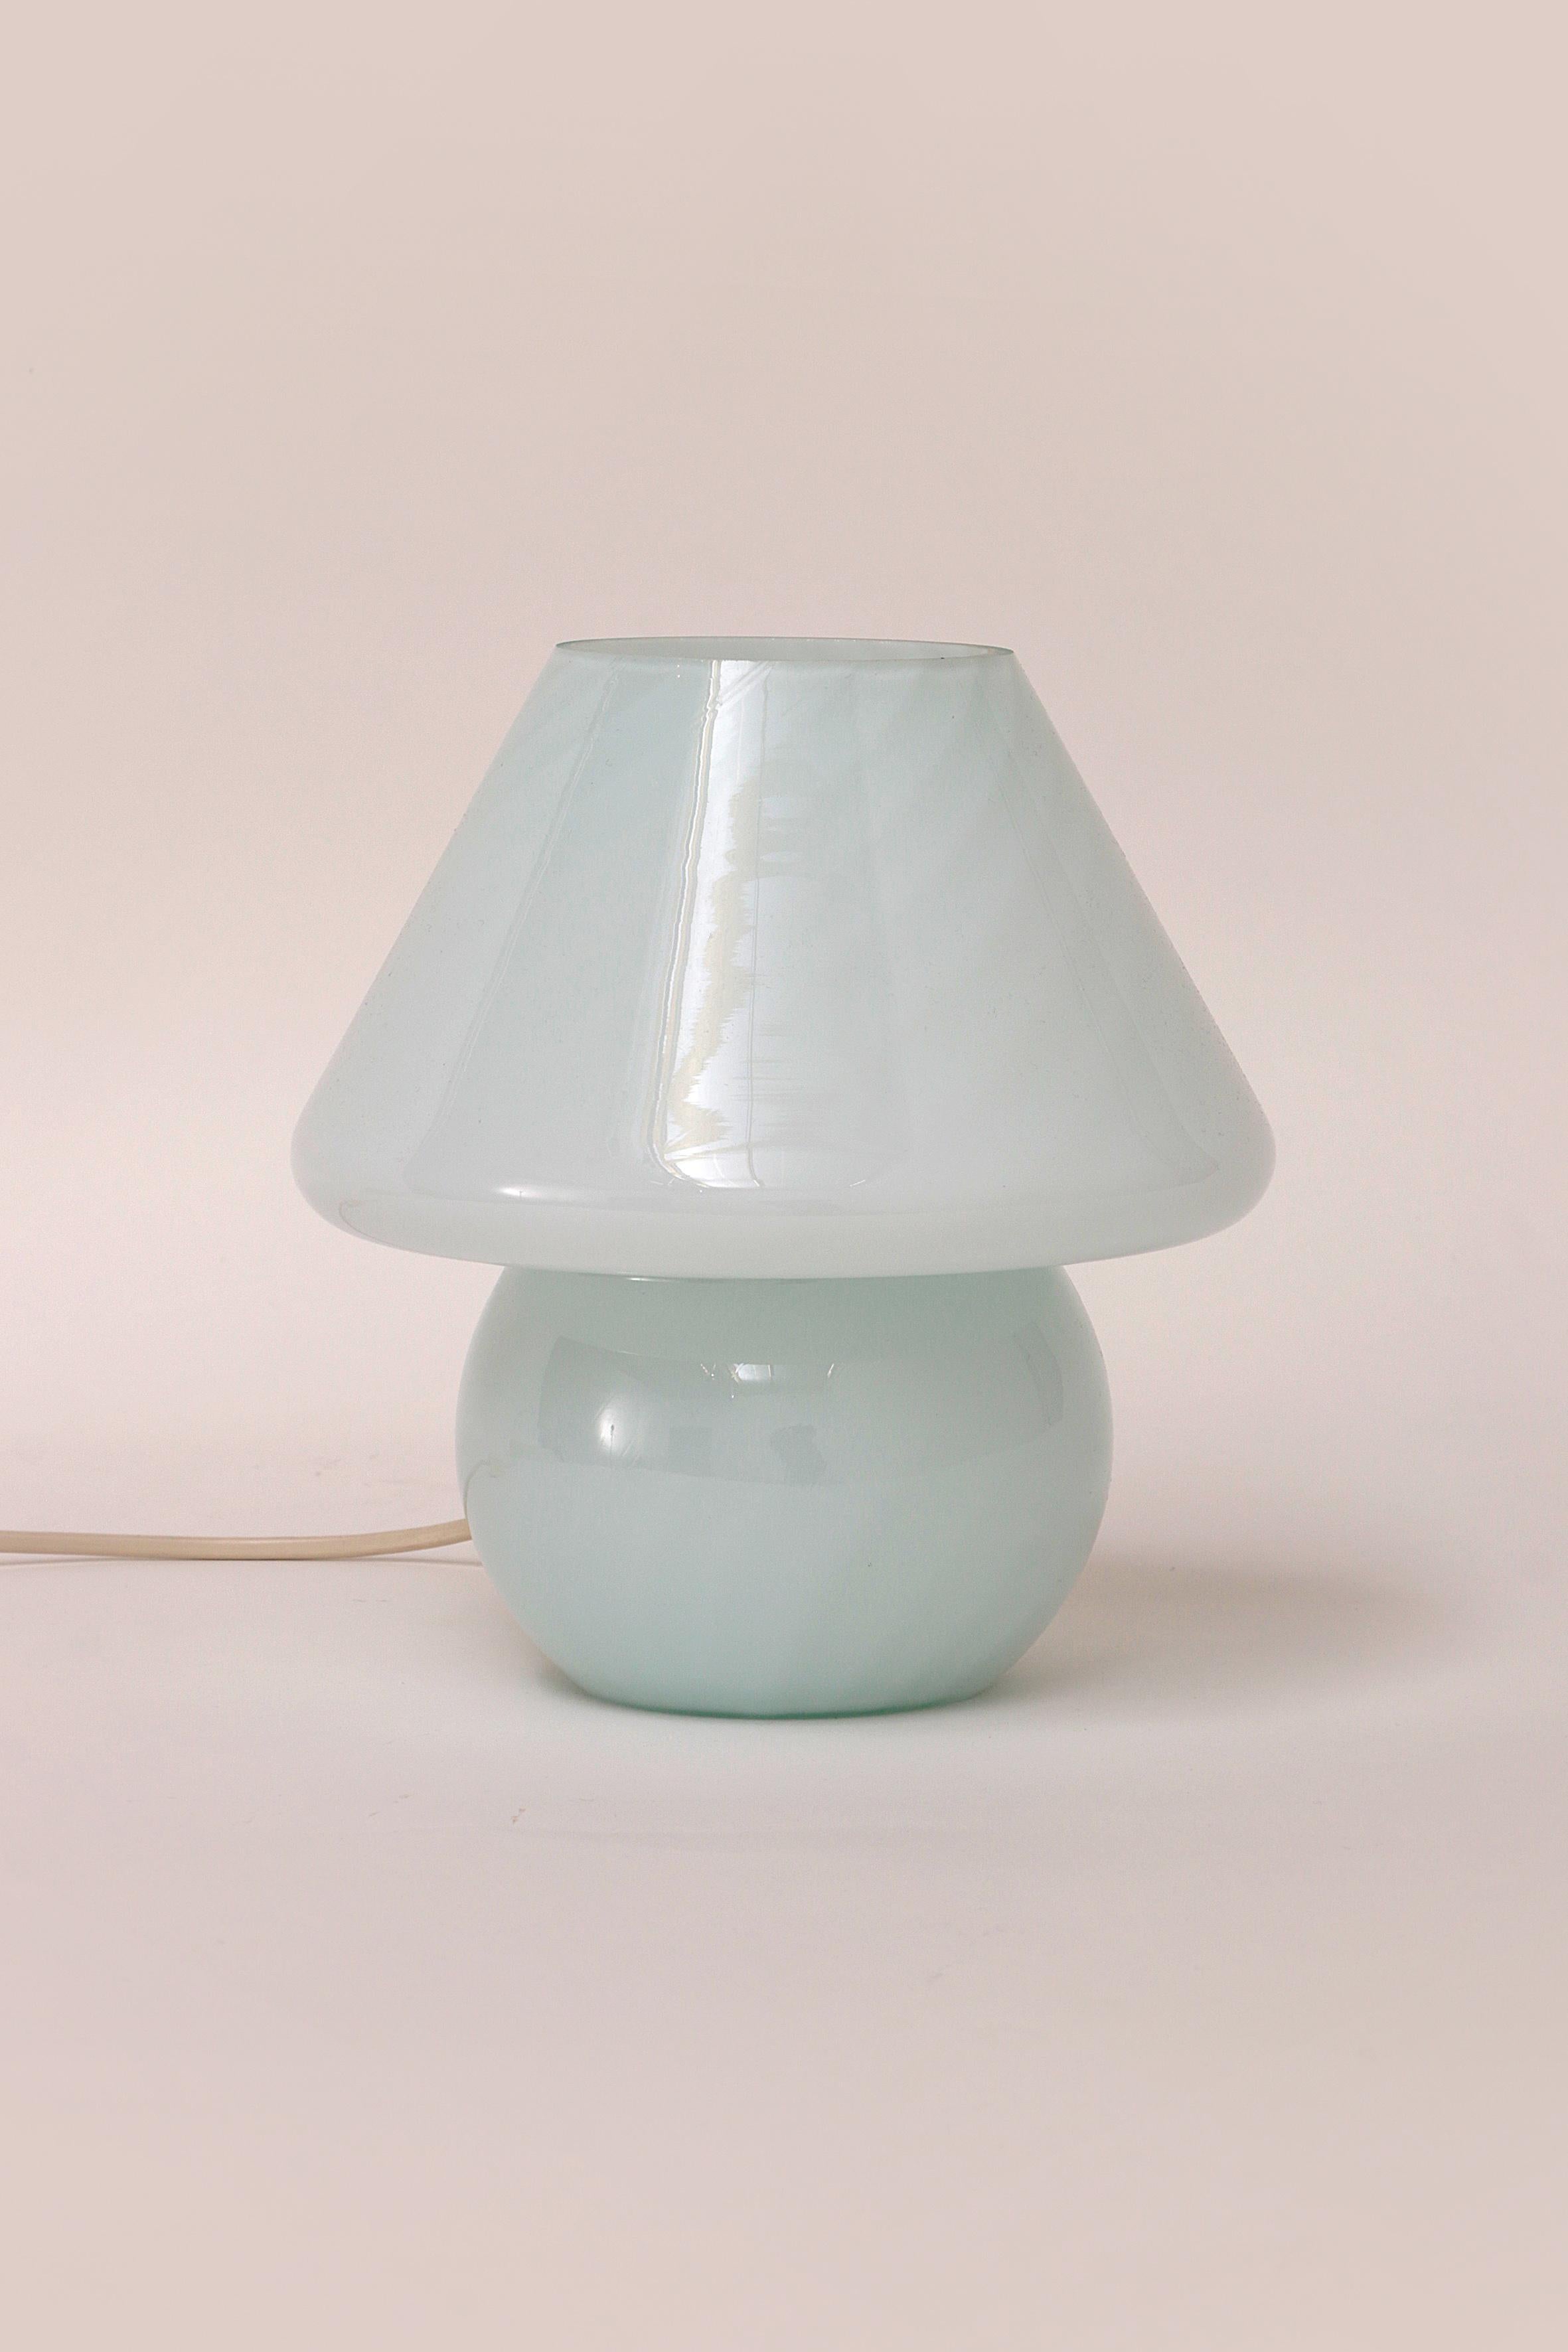 Beautiful mushroom lamp with a beautiful light made by Glashutte Germany in the 1960s.

It is bright without dazzling. With a nice soft light and a switch.

And casts light on the ceiling through the opening, which also pleasantly illuminates